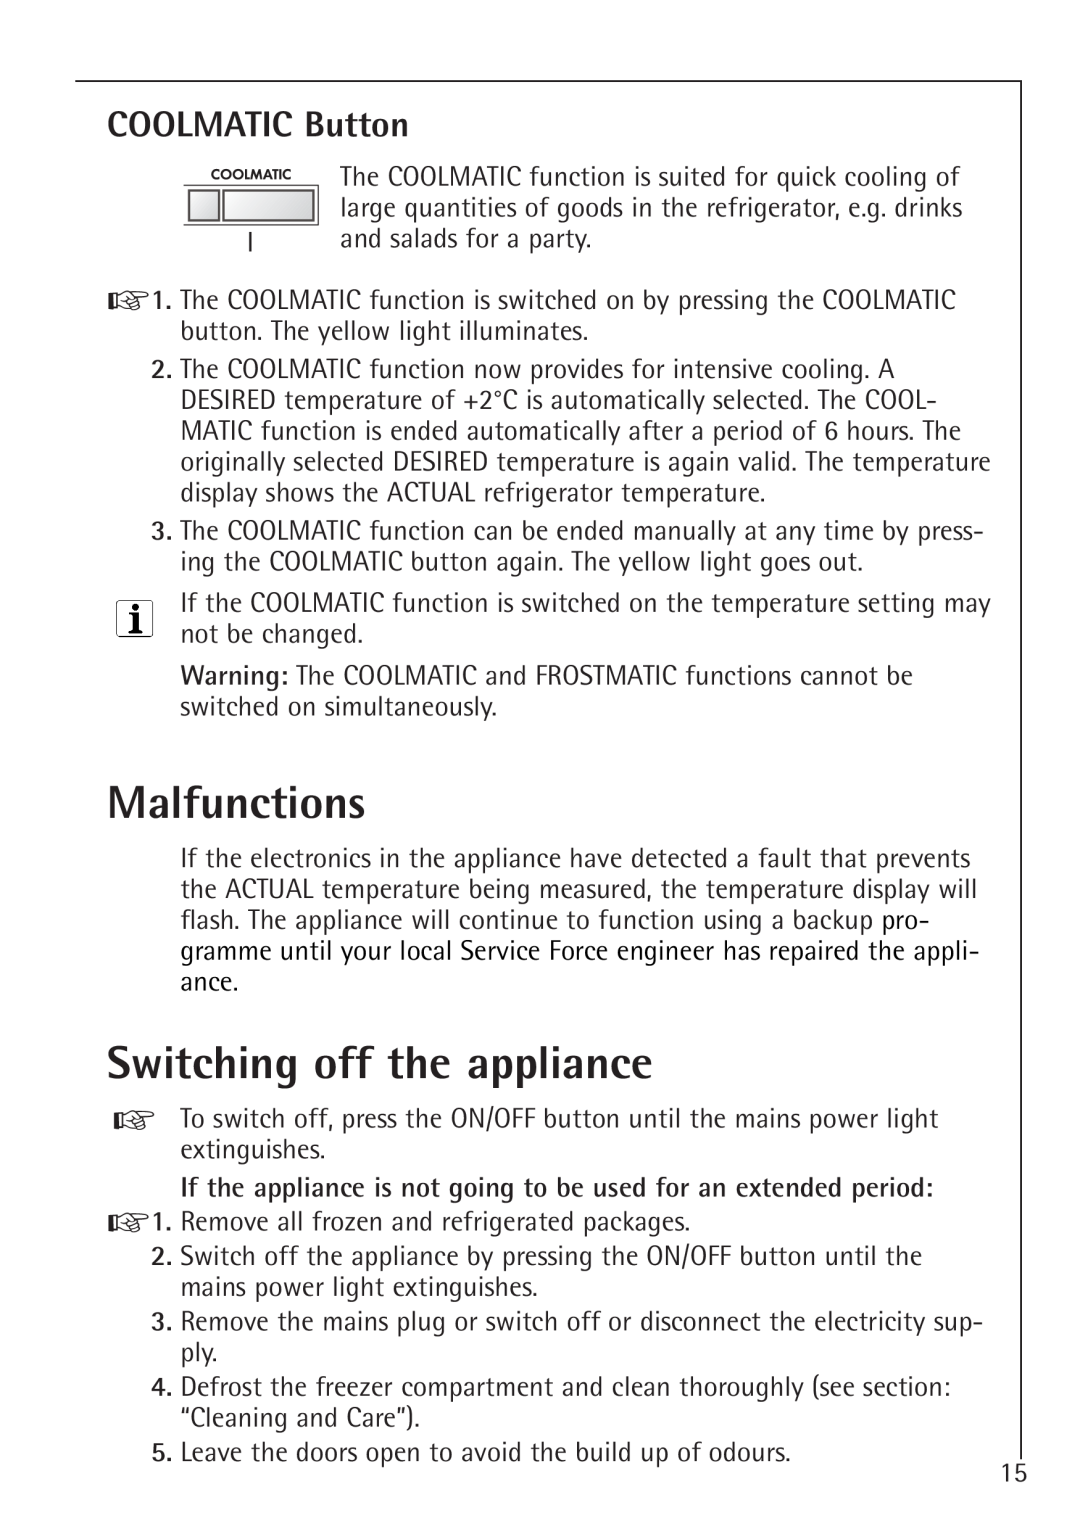 Electrolux 1583-8 TK operating instructions Malfunctions, Switching off the appliance, COOLMATIC Button 